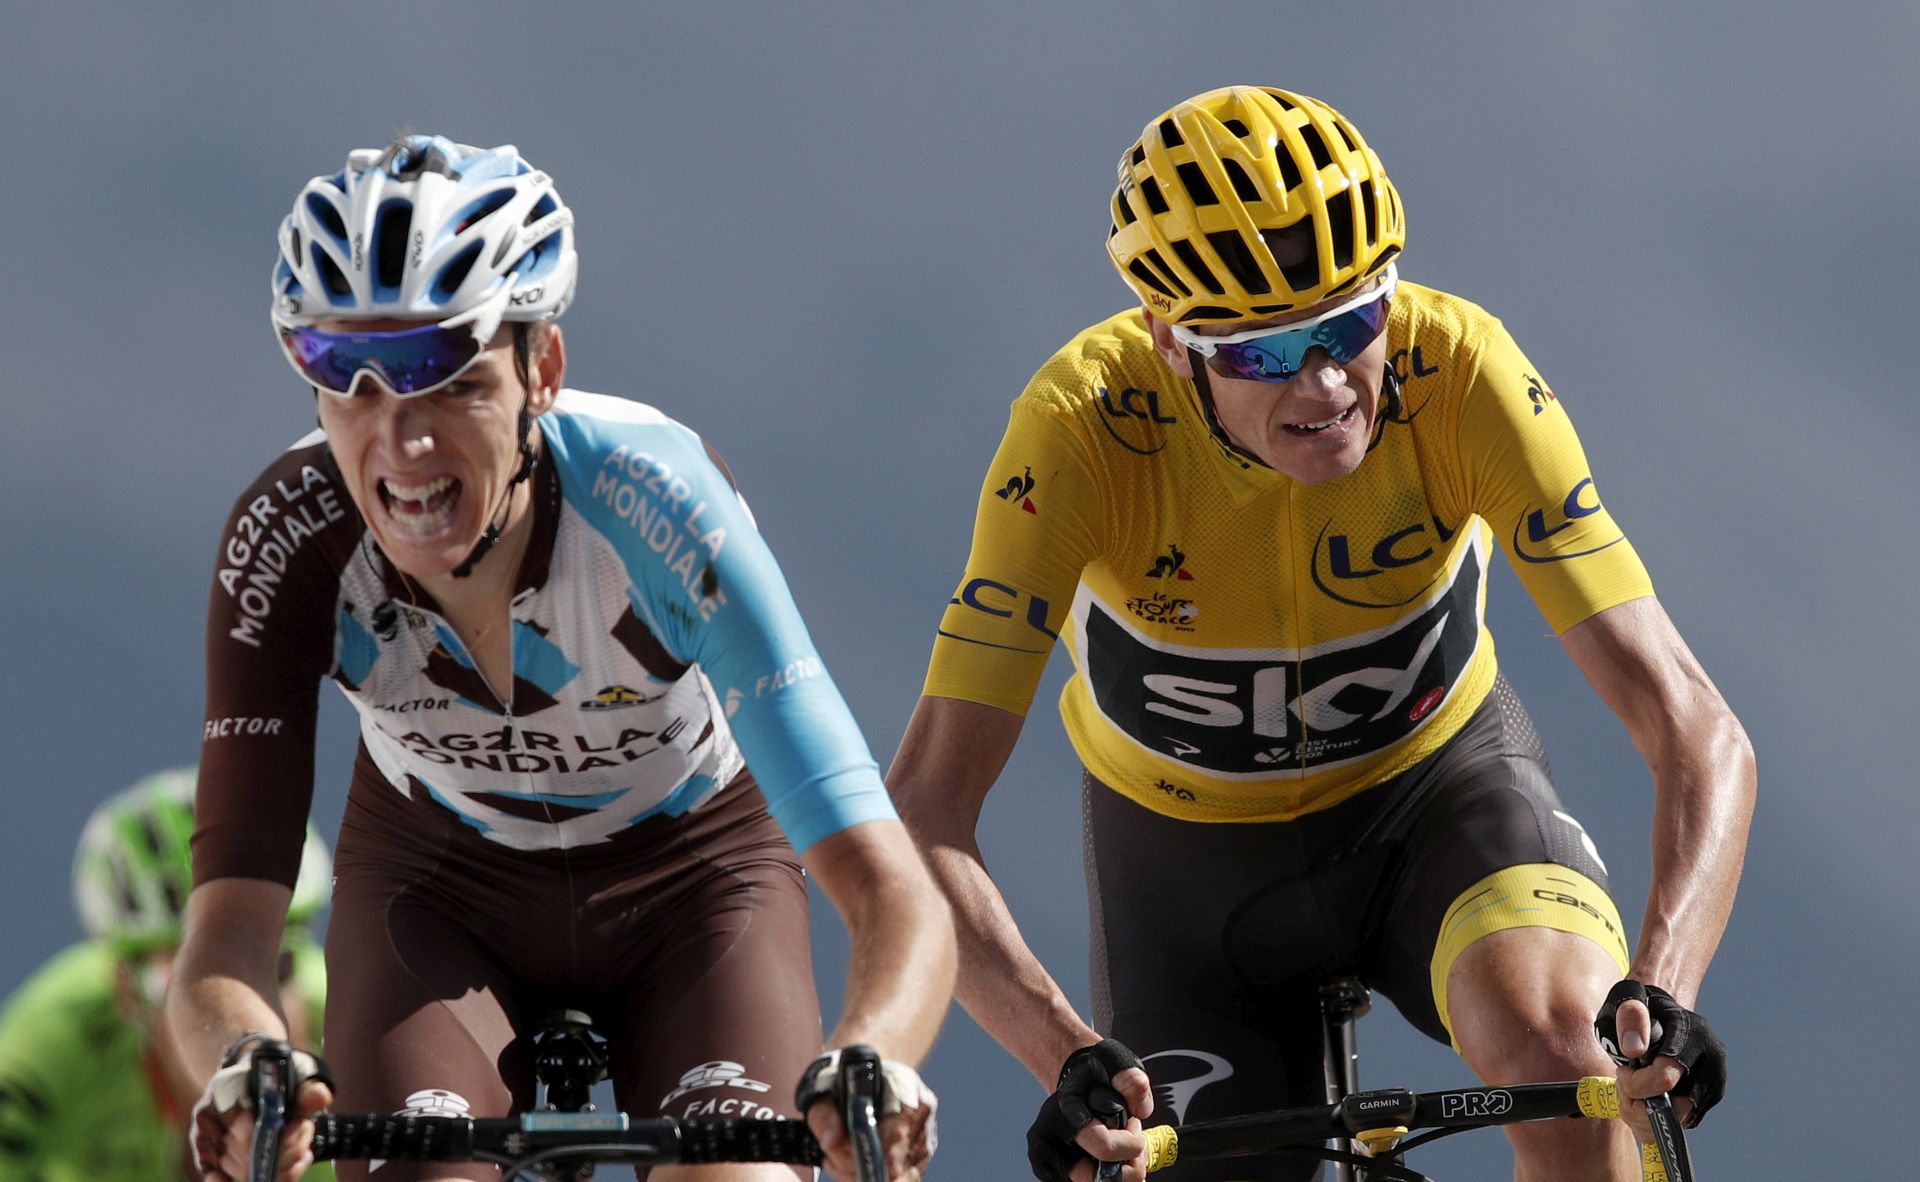 epa06099293 AG2R La Mondiale team rider Romain Bardet (L) of France and Team Sky rider Christopher Froome (R) of Great Britain cross the finish line of the 18th stage of the 104th edition of the Tour de France cycling race over 179,5km between Briancon and Izoard, France, 20 July 2017.  EPA/YOAN VALAT